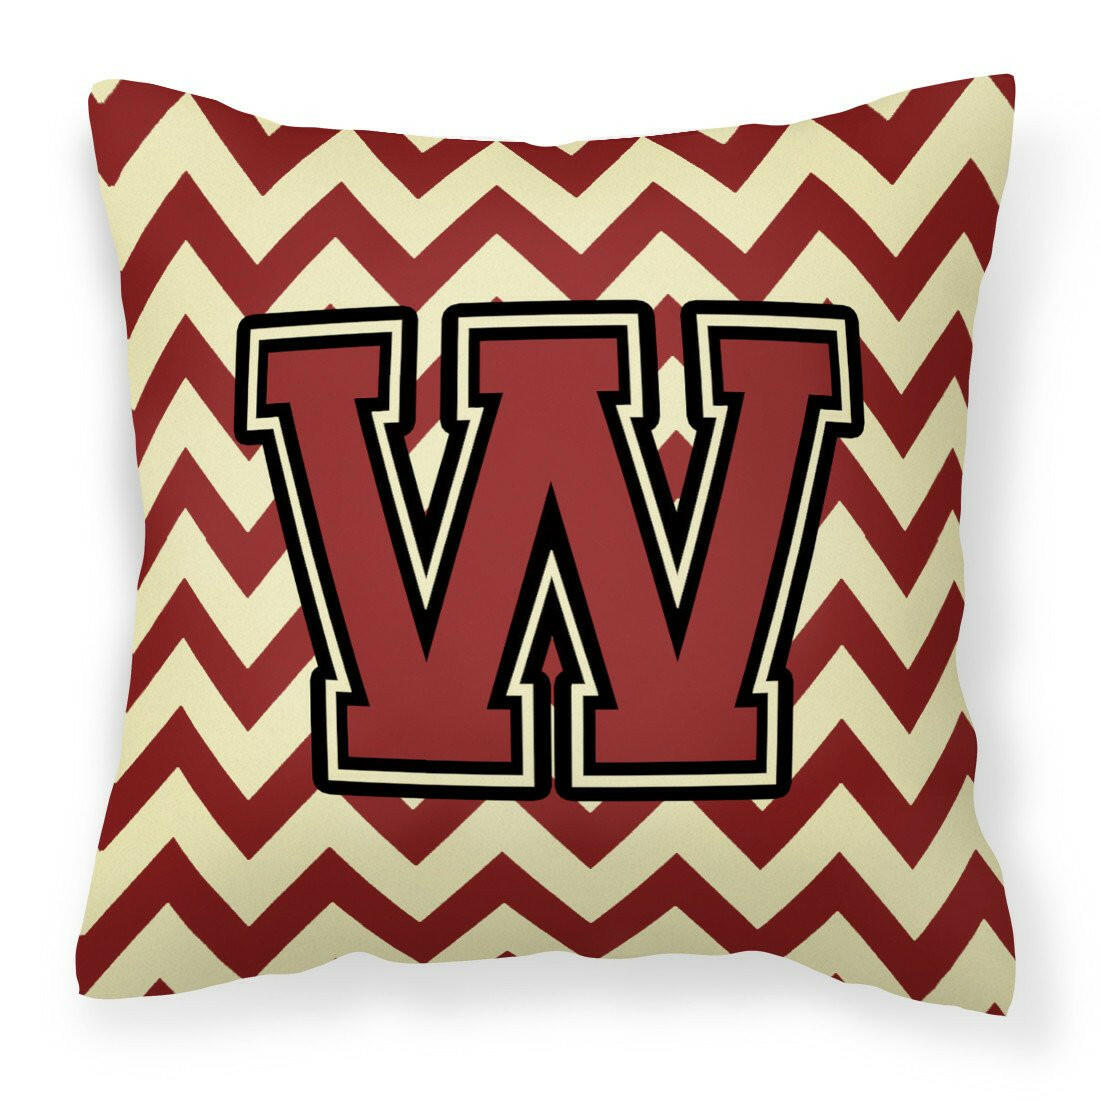 Letter W Chevron Maroon and Gold Fabric Decorative Pillow CJ1061-WPW1414 by Caroline's Treasures